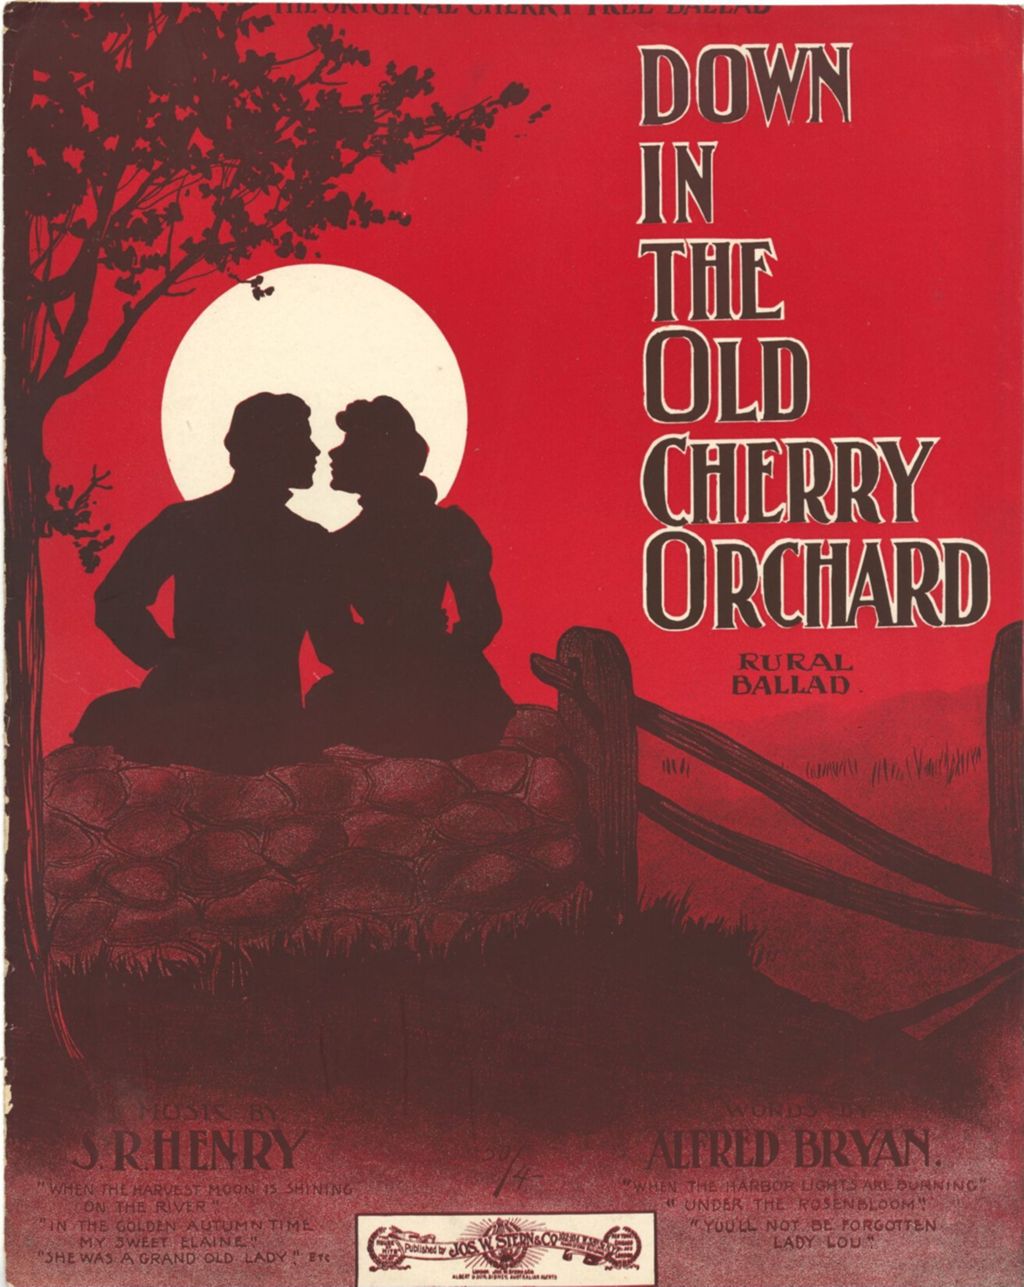 Miniature of Down in the Old Cherry Orchard